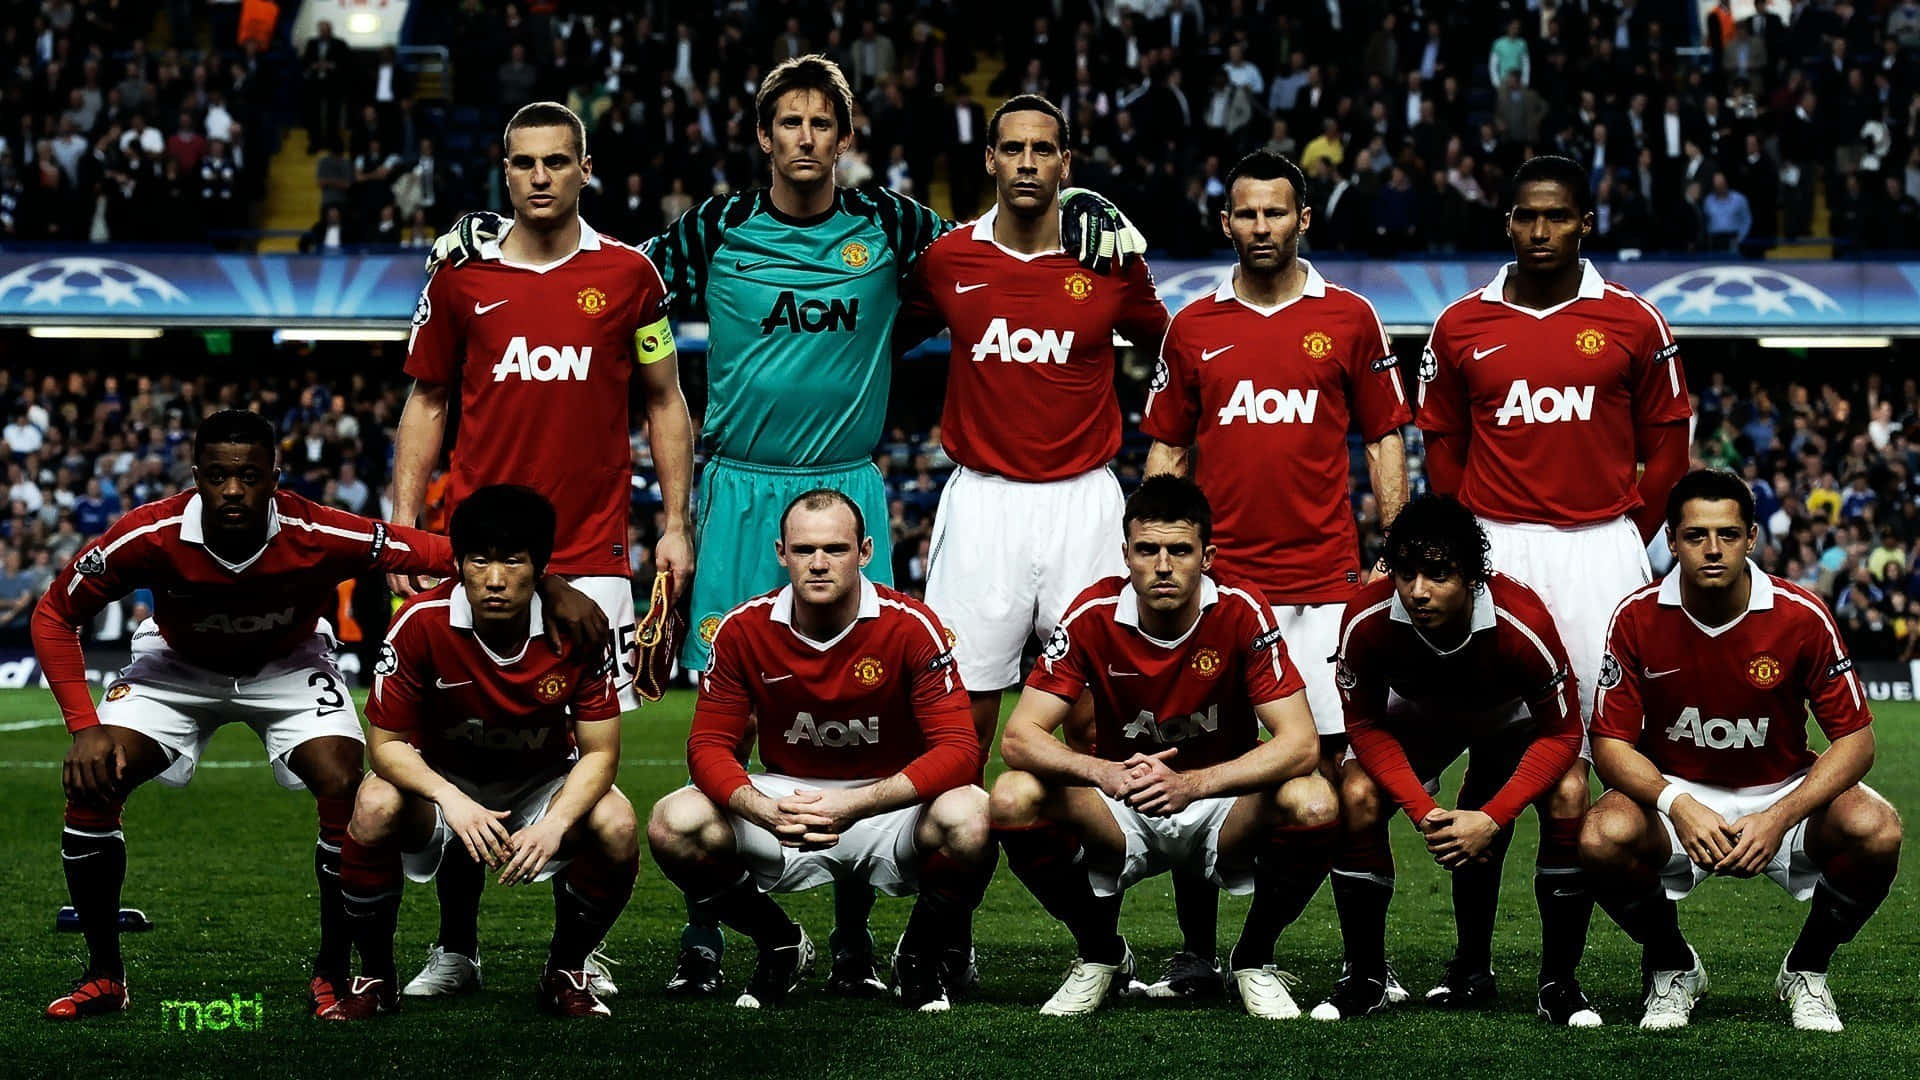 Manchester United face off against their opponents in the Premier League Wallpaper